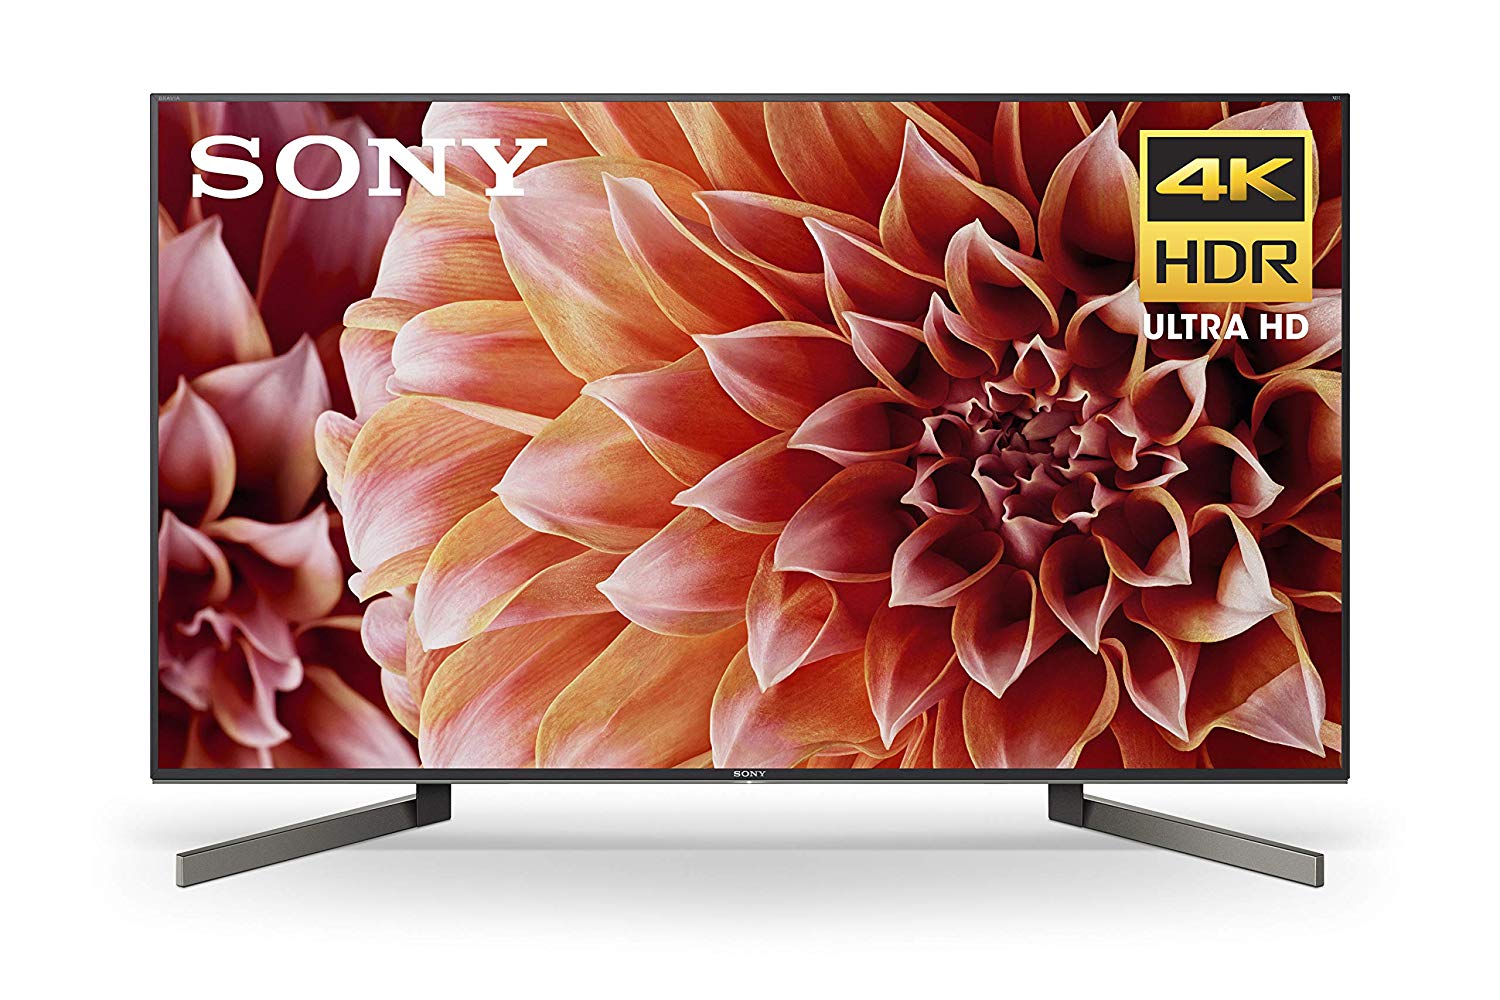 Sony 4K Ultra HD Smart TV, Sony 4K Ultra HD Smart TV Review